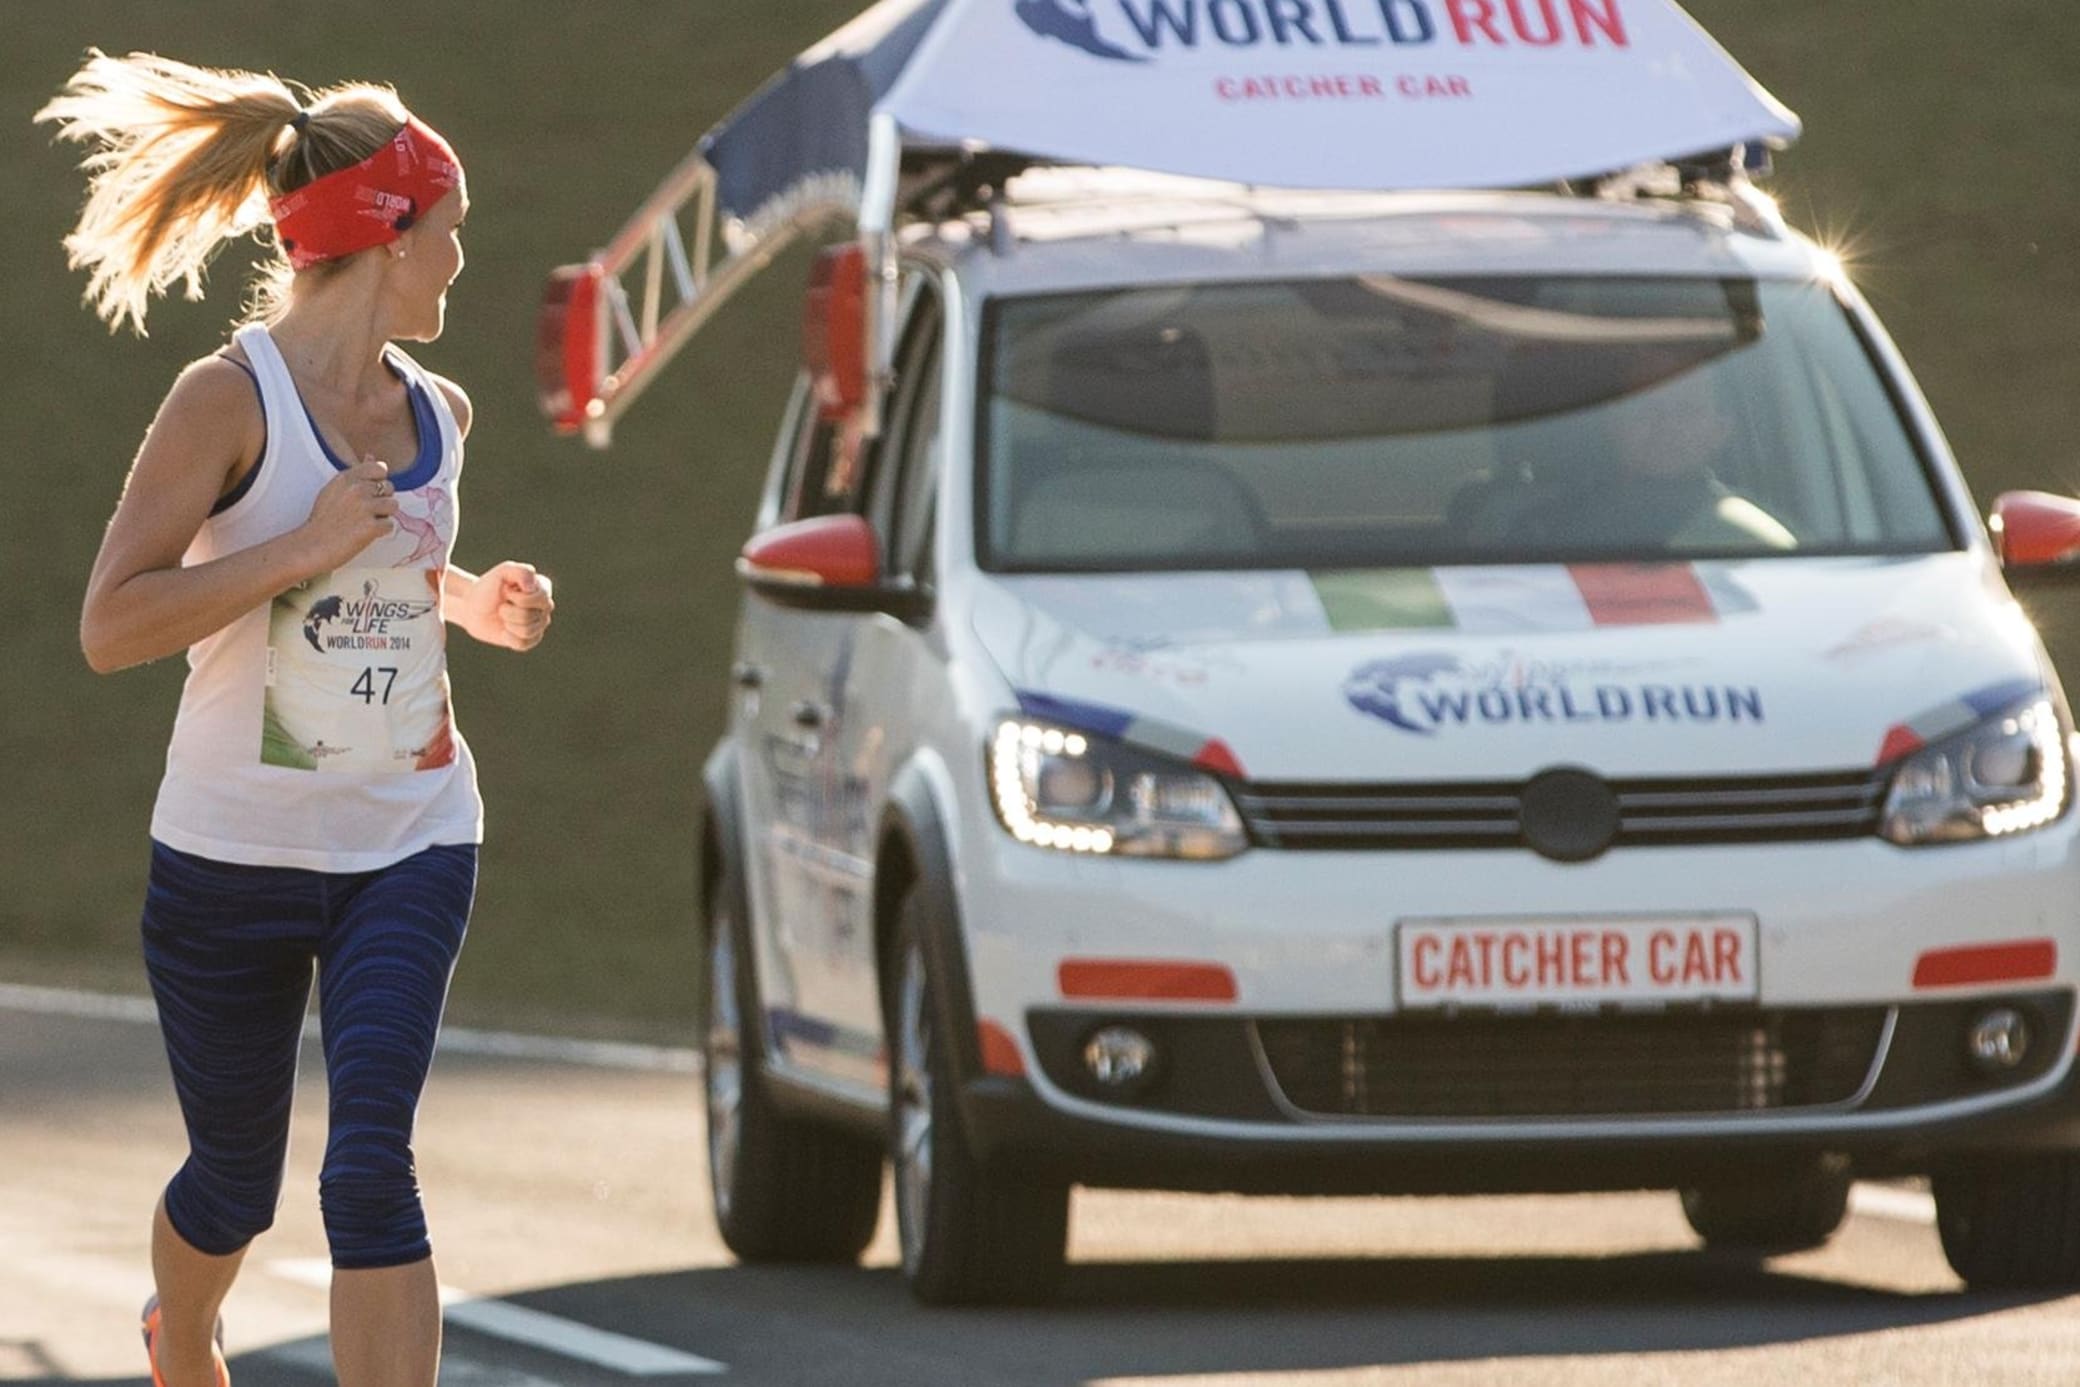 The Catcher Car for the Wings for Life World Run.